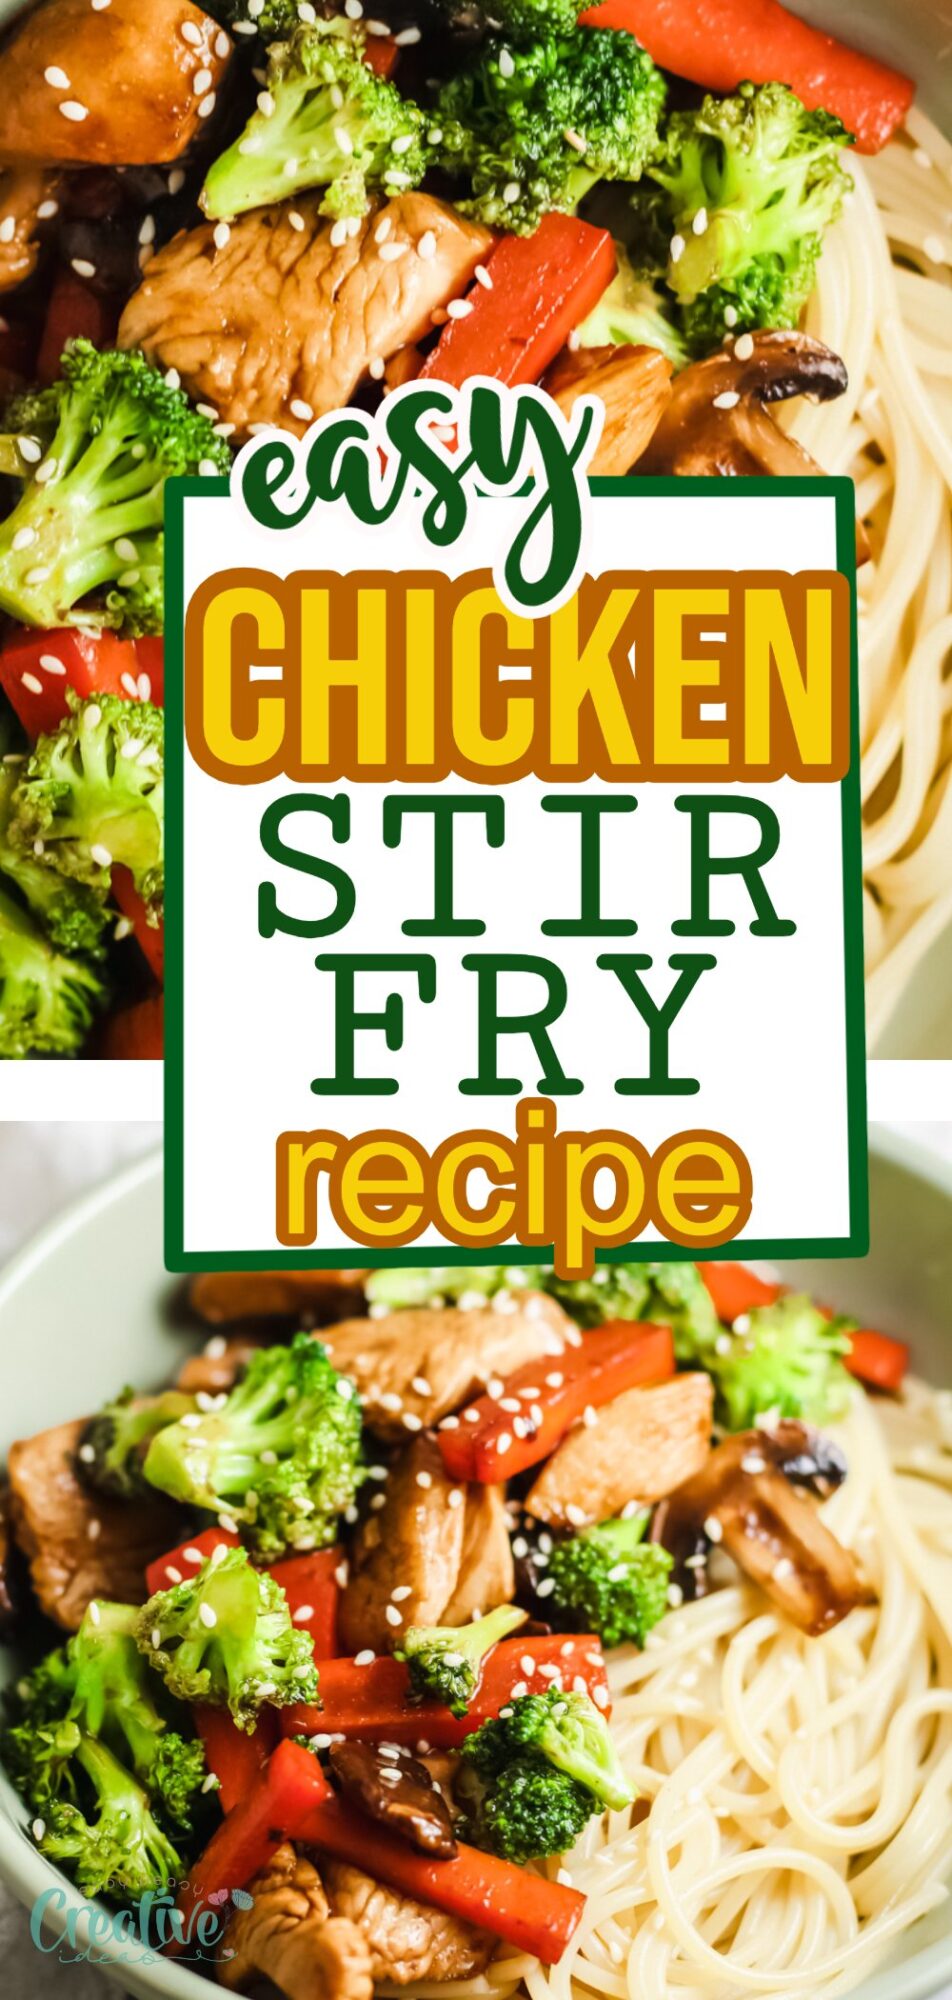 Enjoy this delicious and easy chicken stir fry for a quick weeknight dinner or weekend meal prep! 